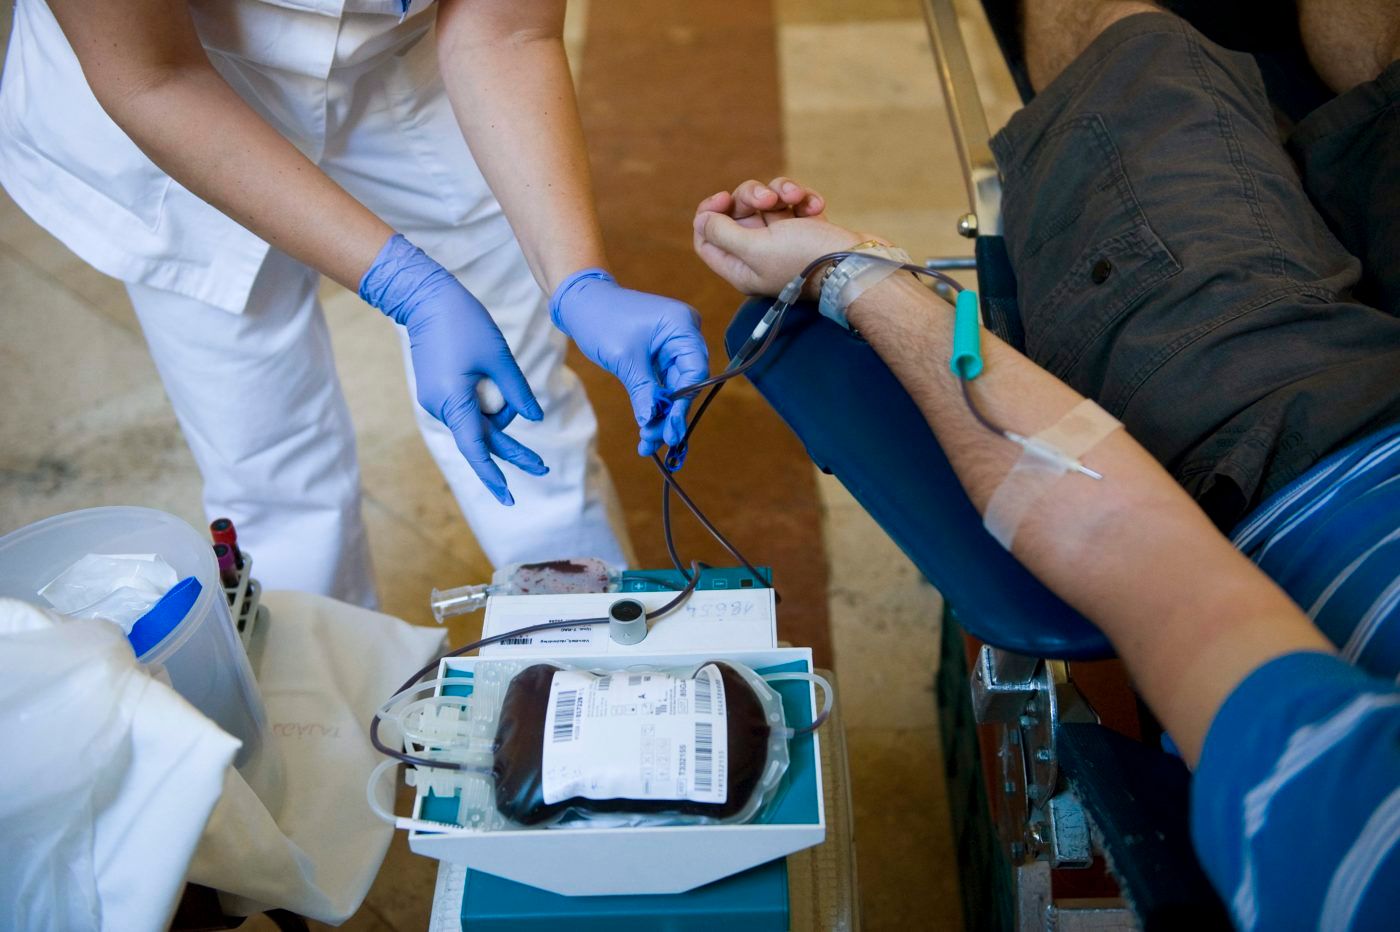 Insider's Guide: How to Donate Blood in Hungary